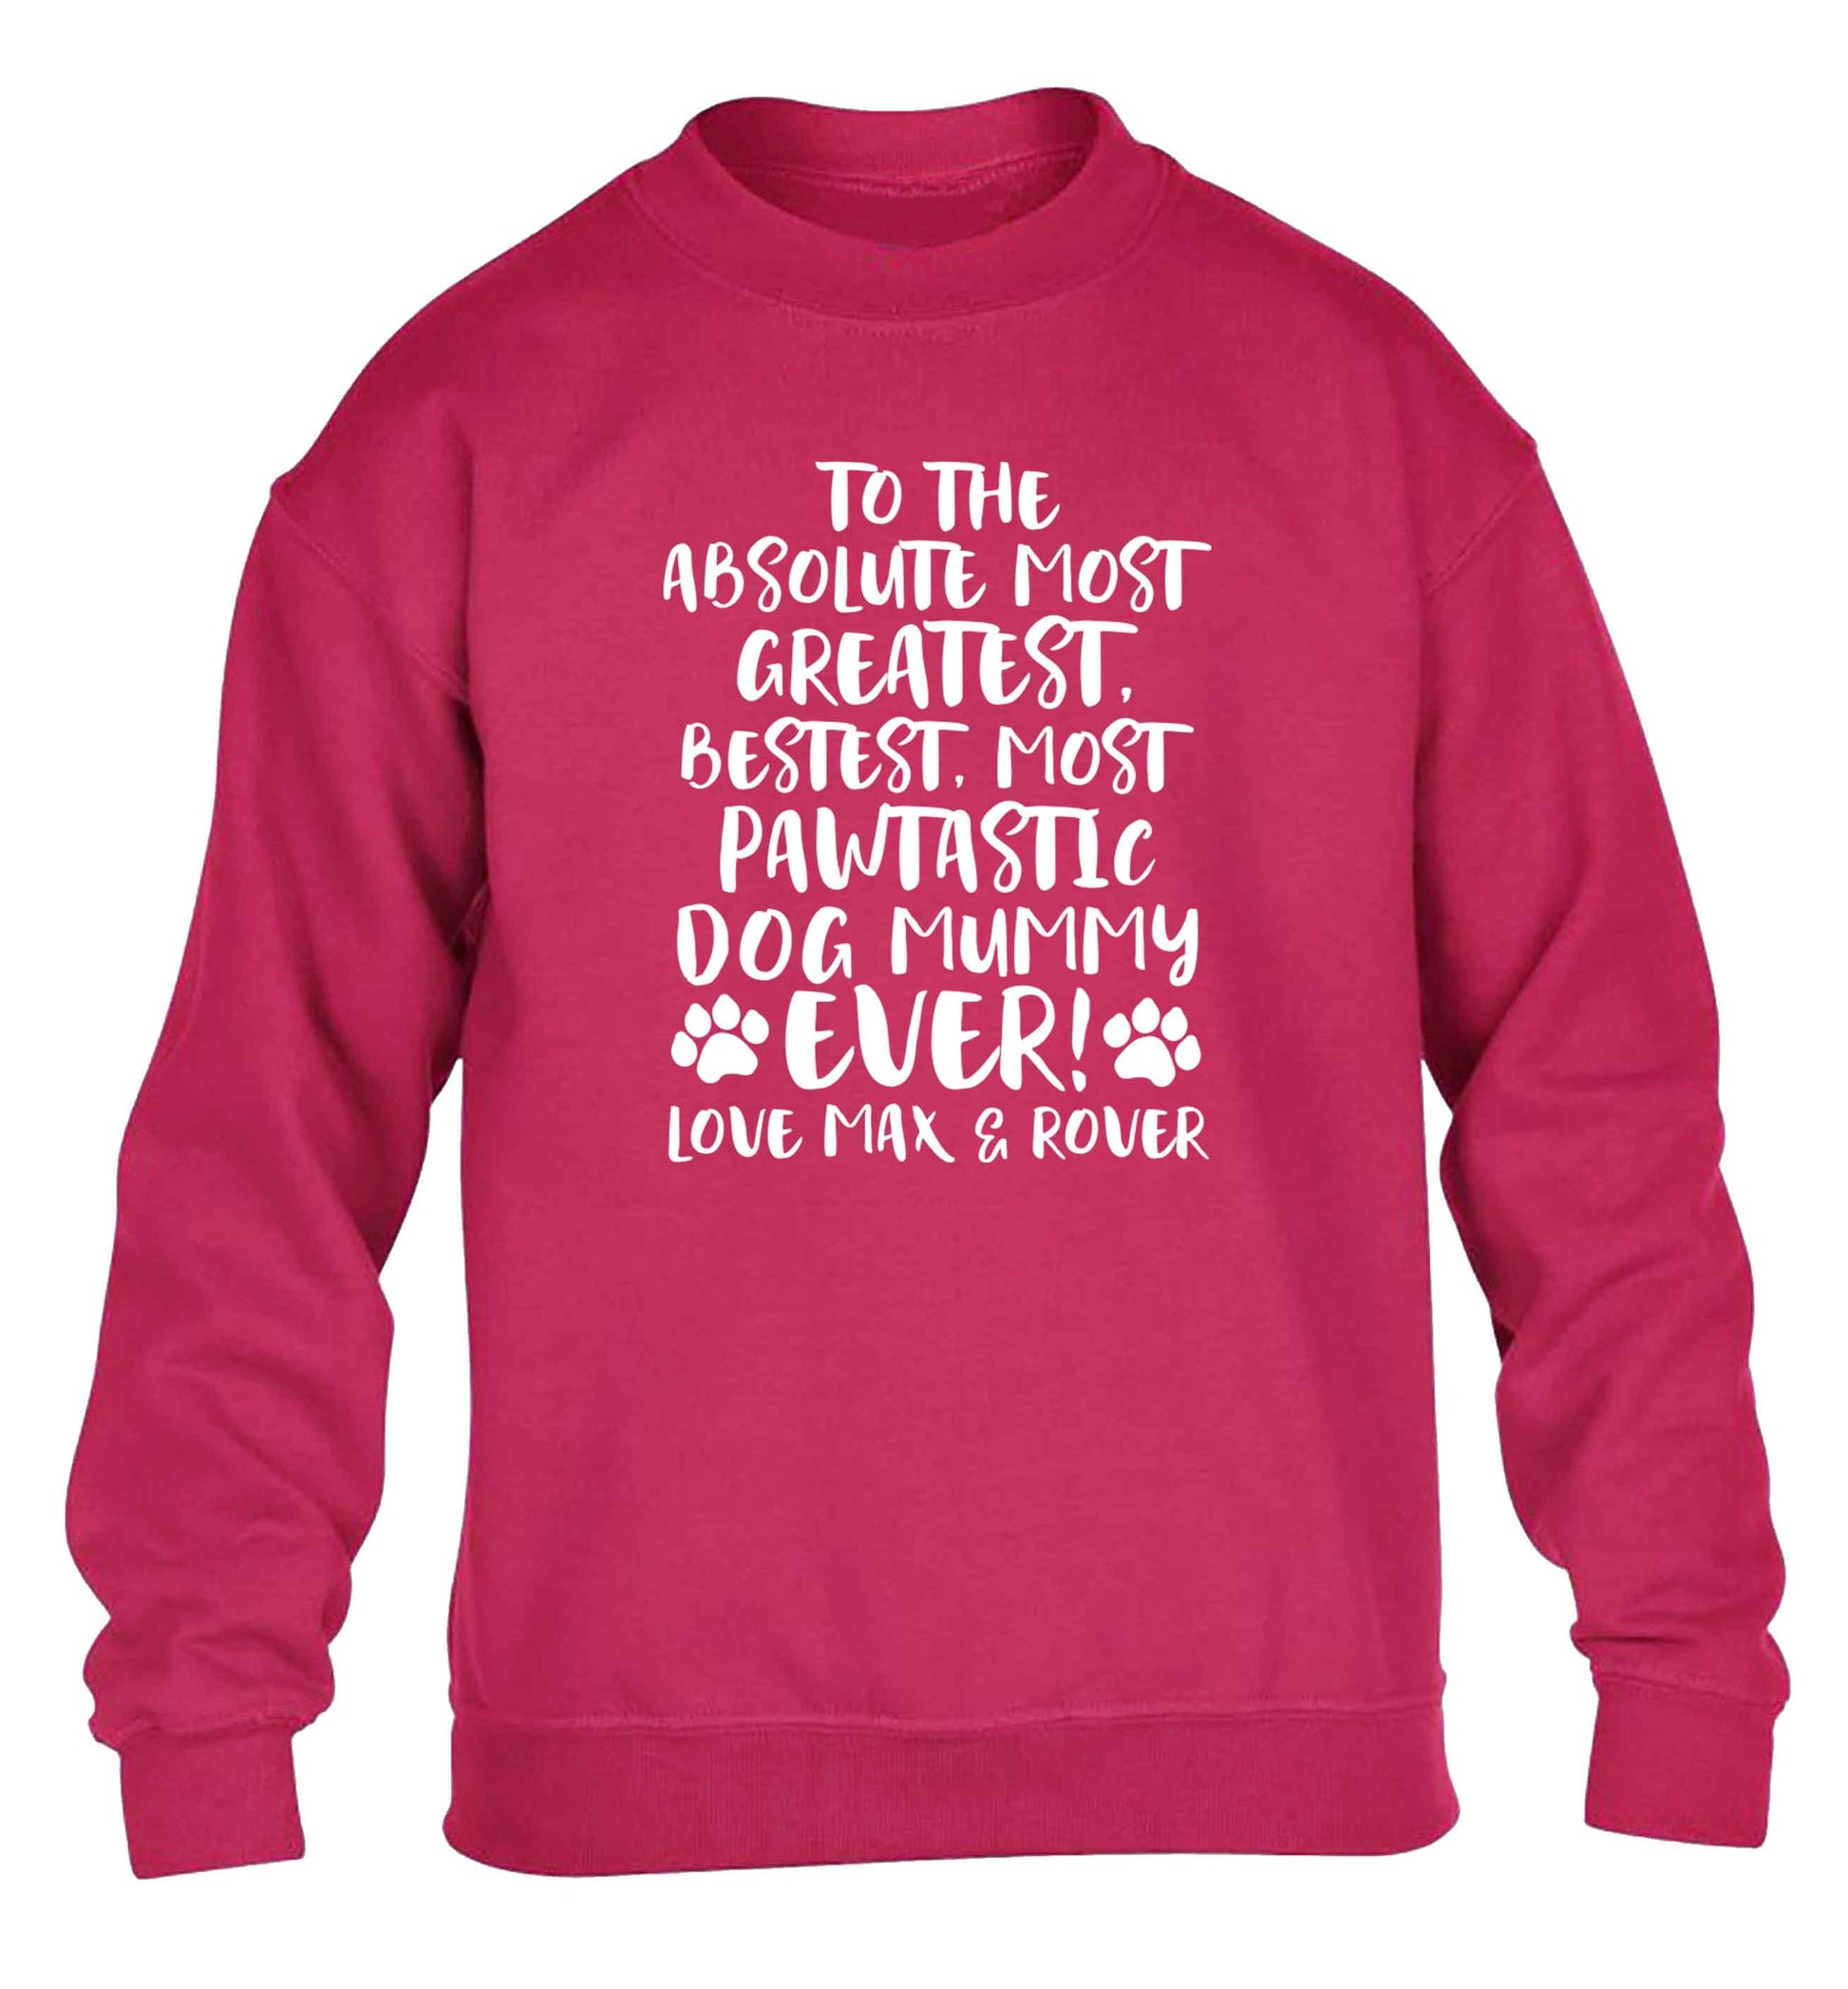 Personalsied to the most pawtastic dog mummy ever children's pink sweater 12-13 Years